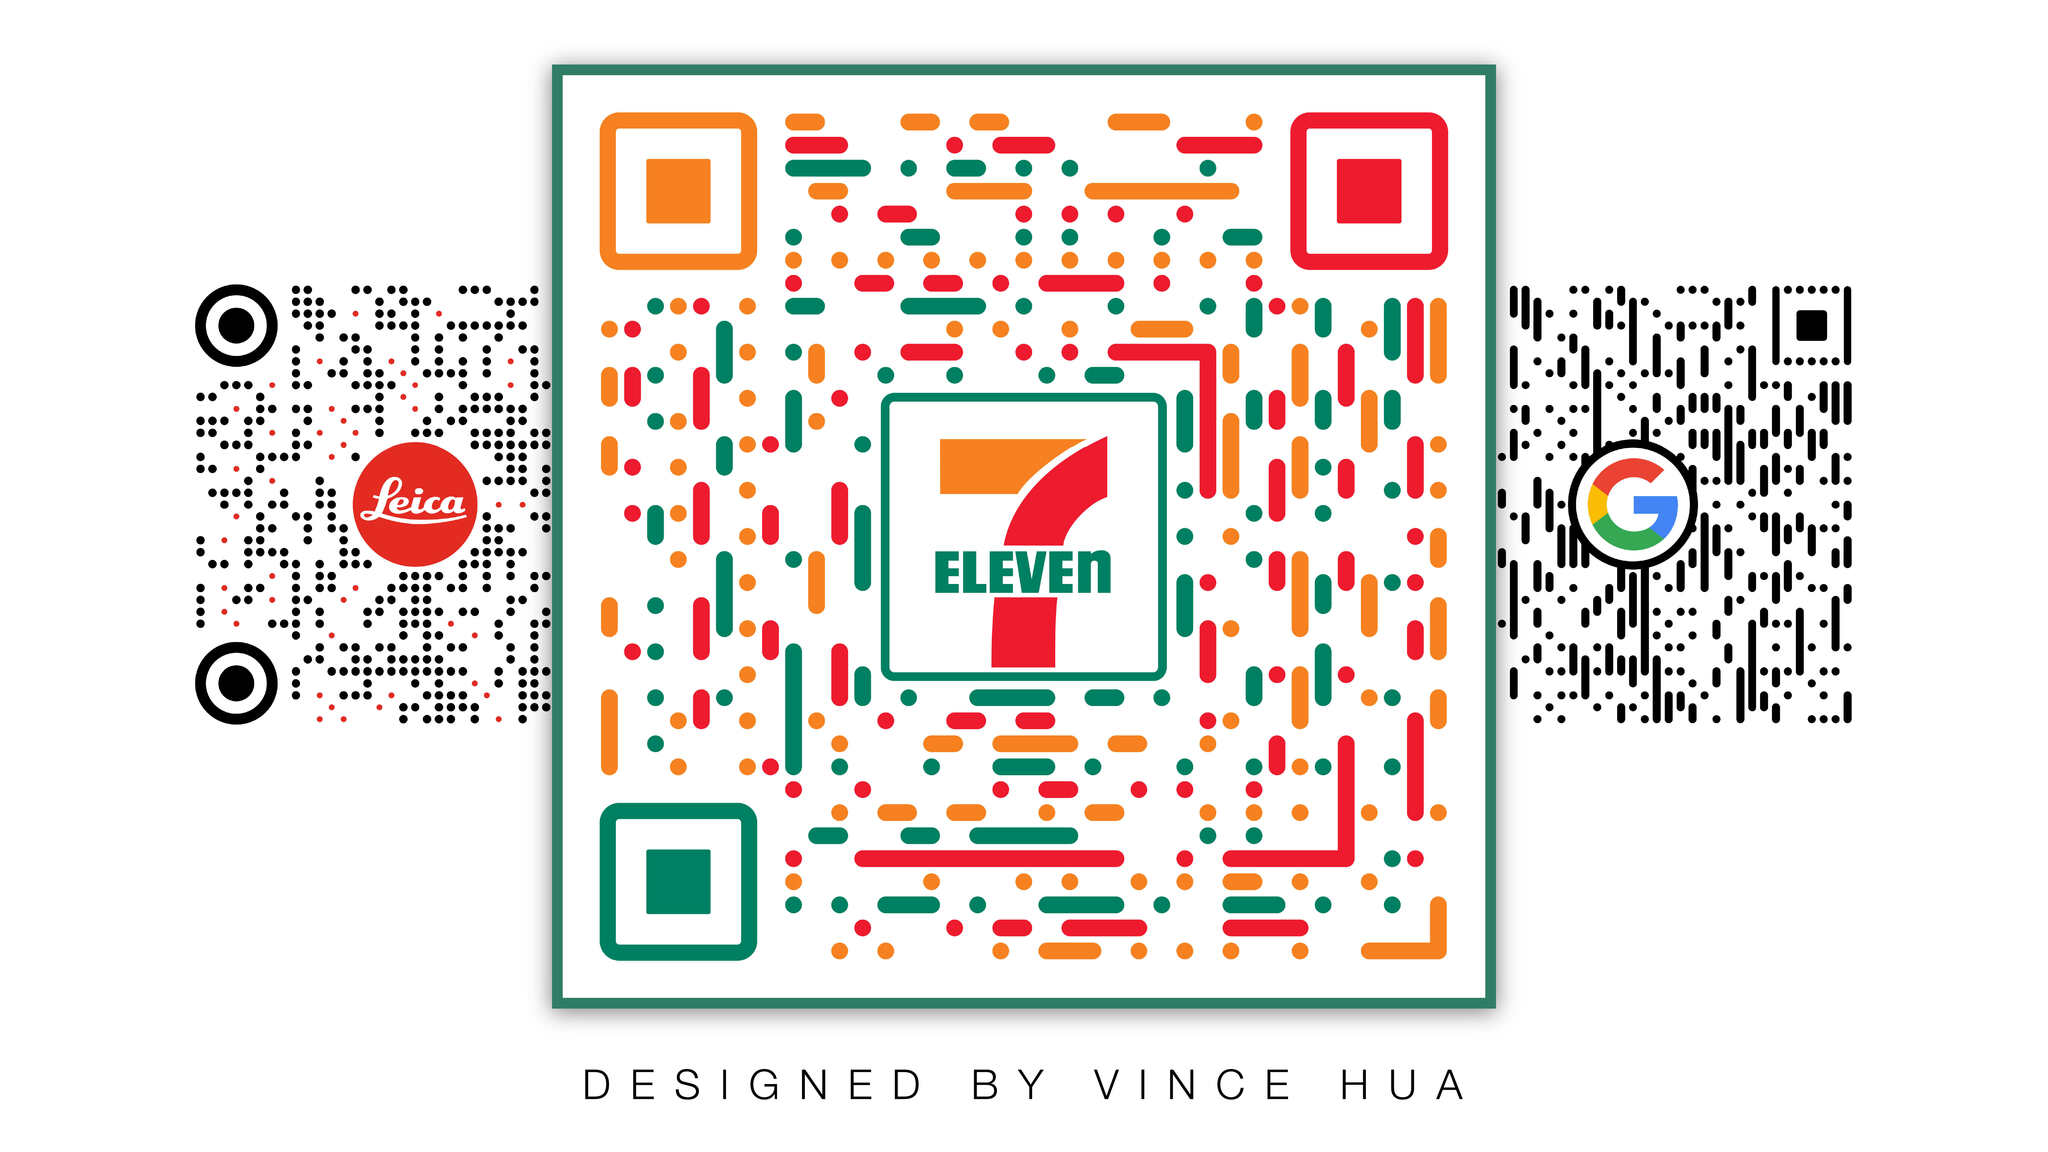 branded QR code example of 7-eleven